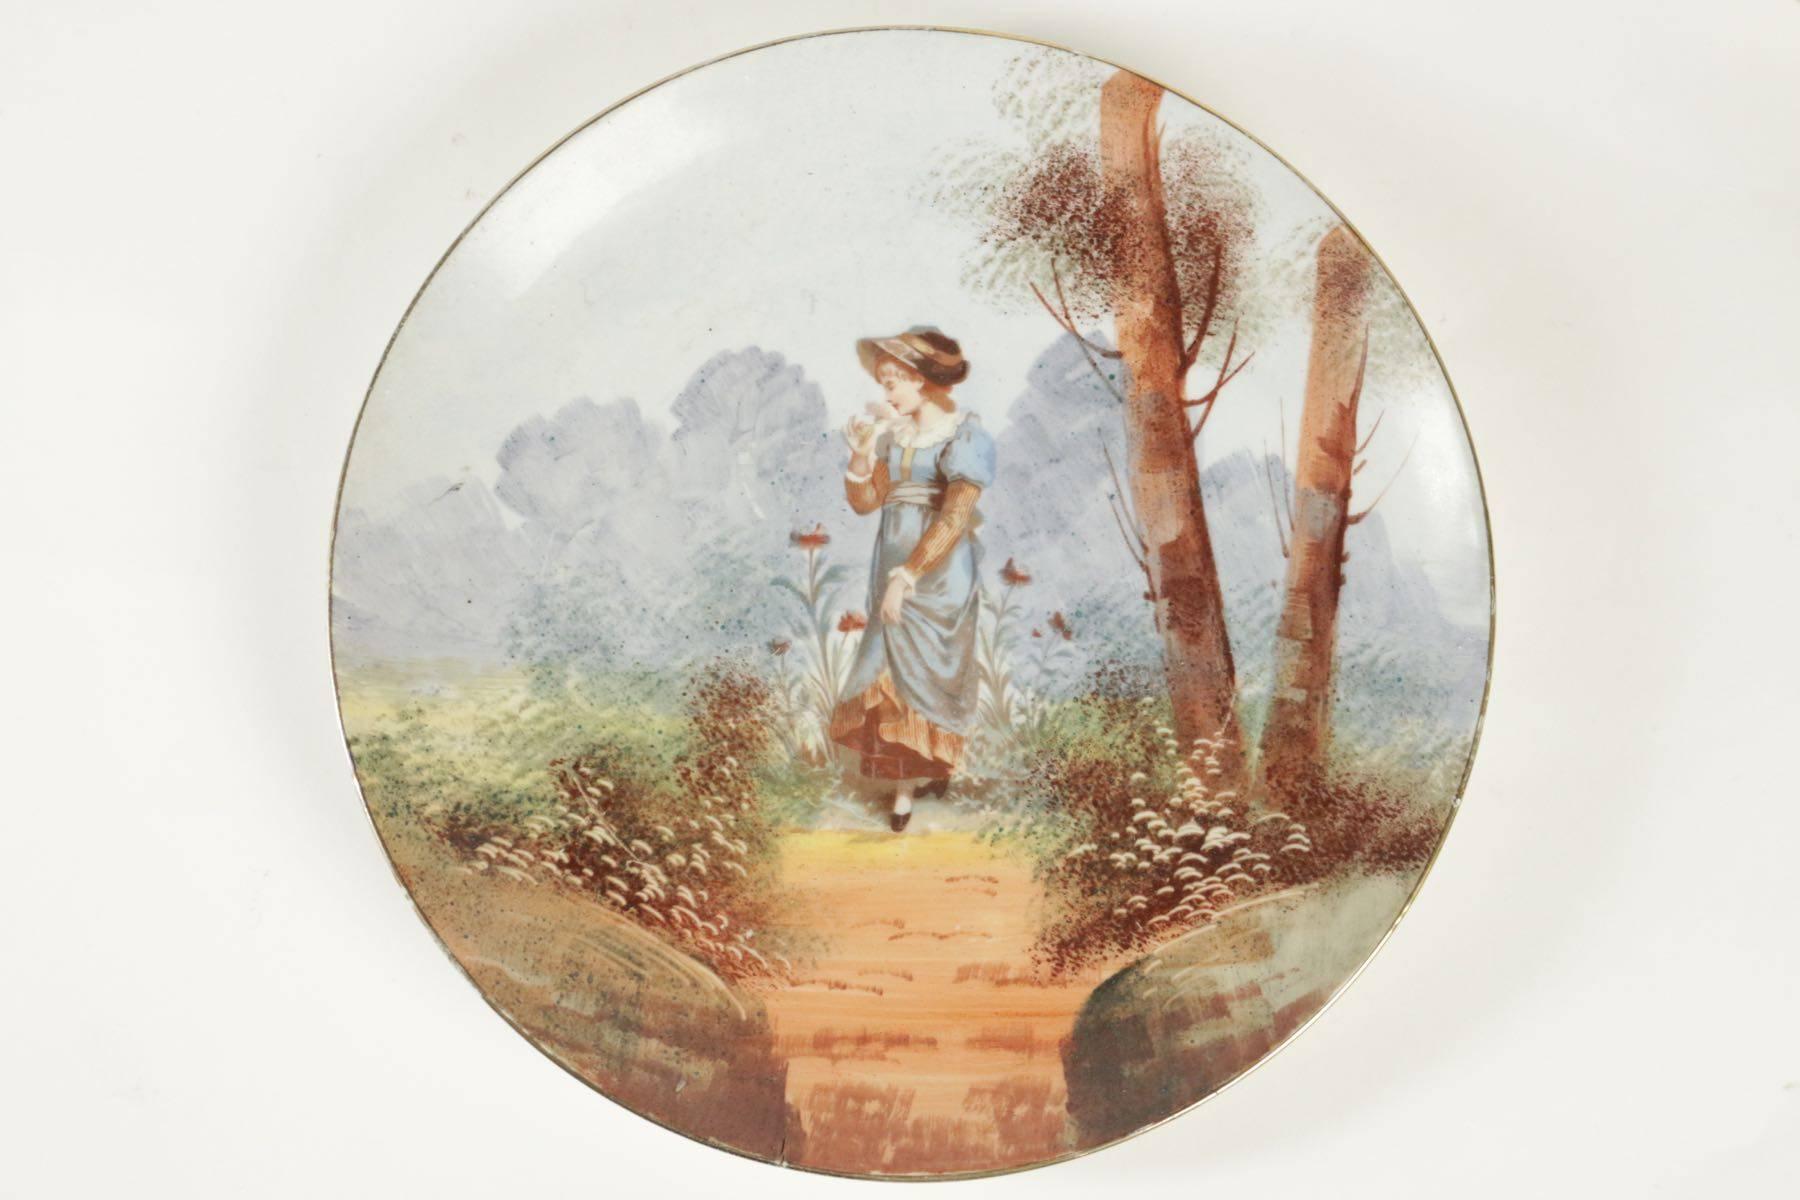 Napoleon III Pair of French Porcelain Hand-Painted Plates from the 19th Century